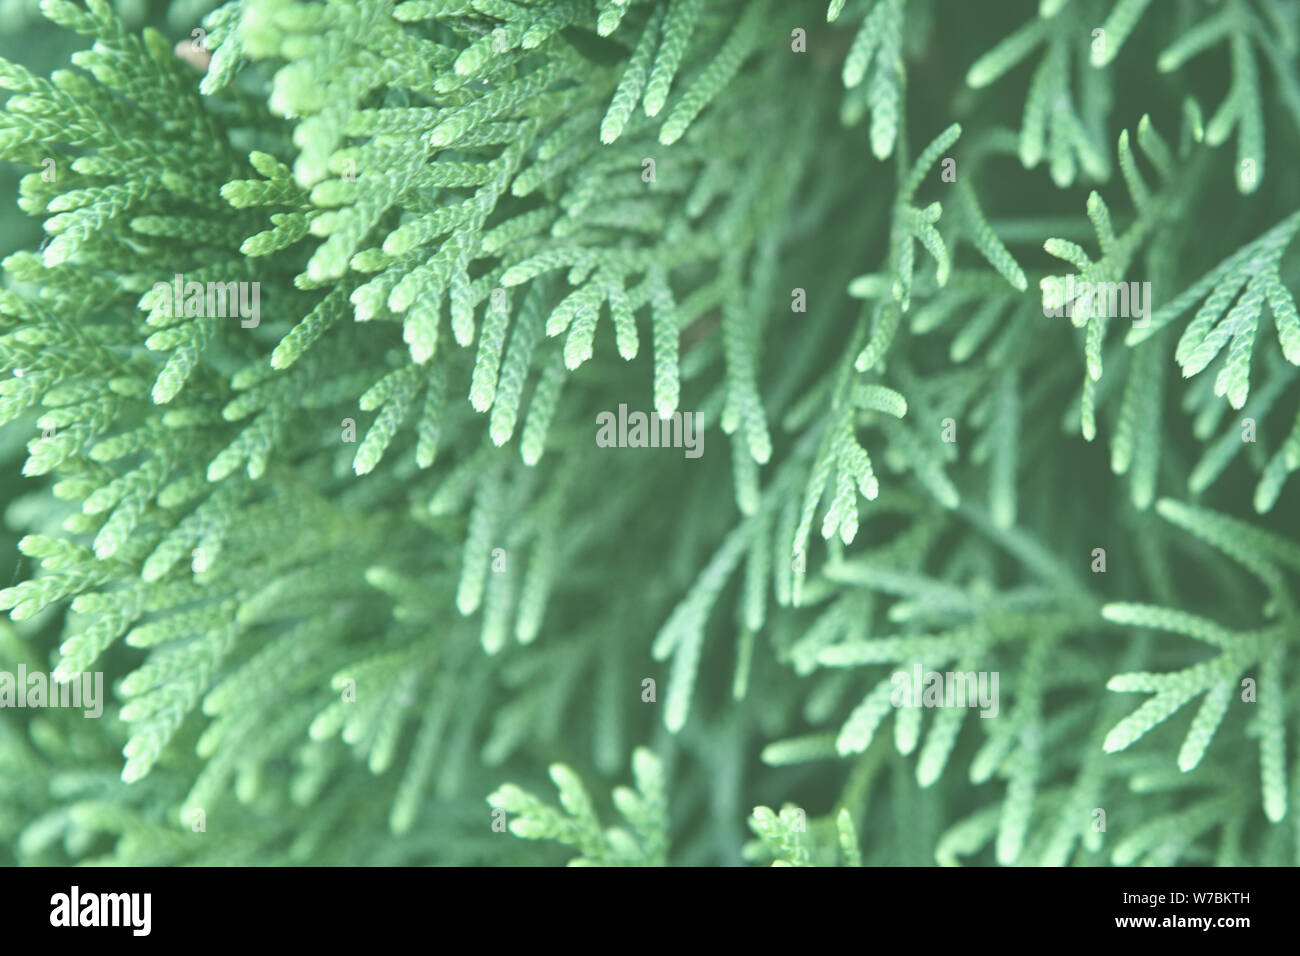 Closeup of trendy mint toned christmas leaves of Thuja trees. Green nature background. Year color concept. Stock Photo